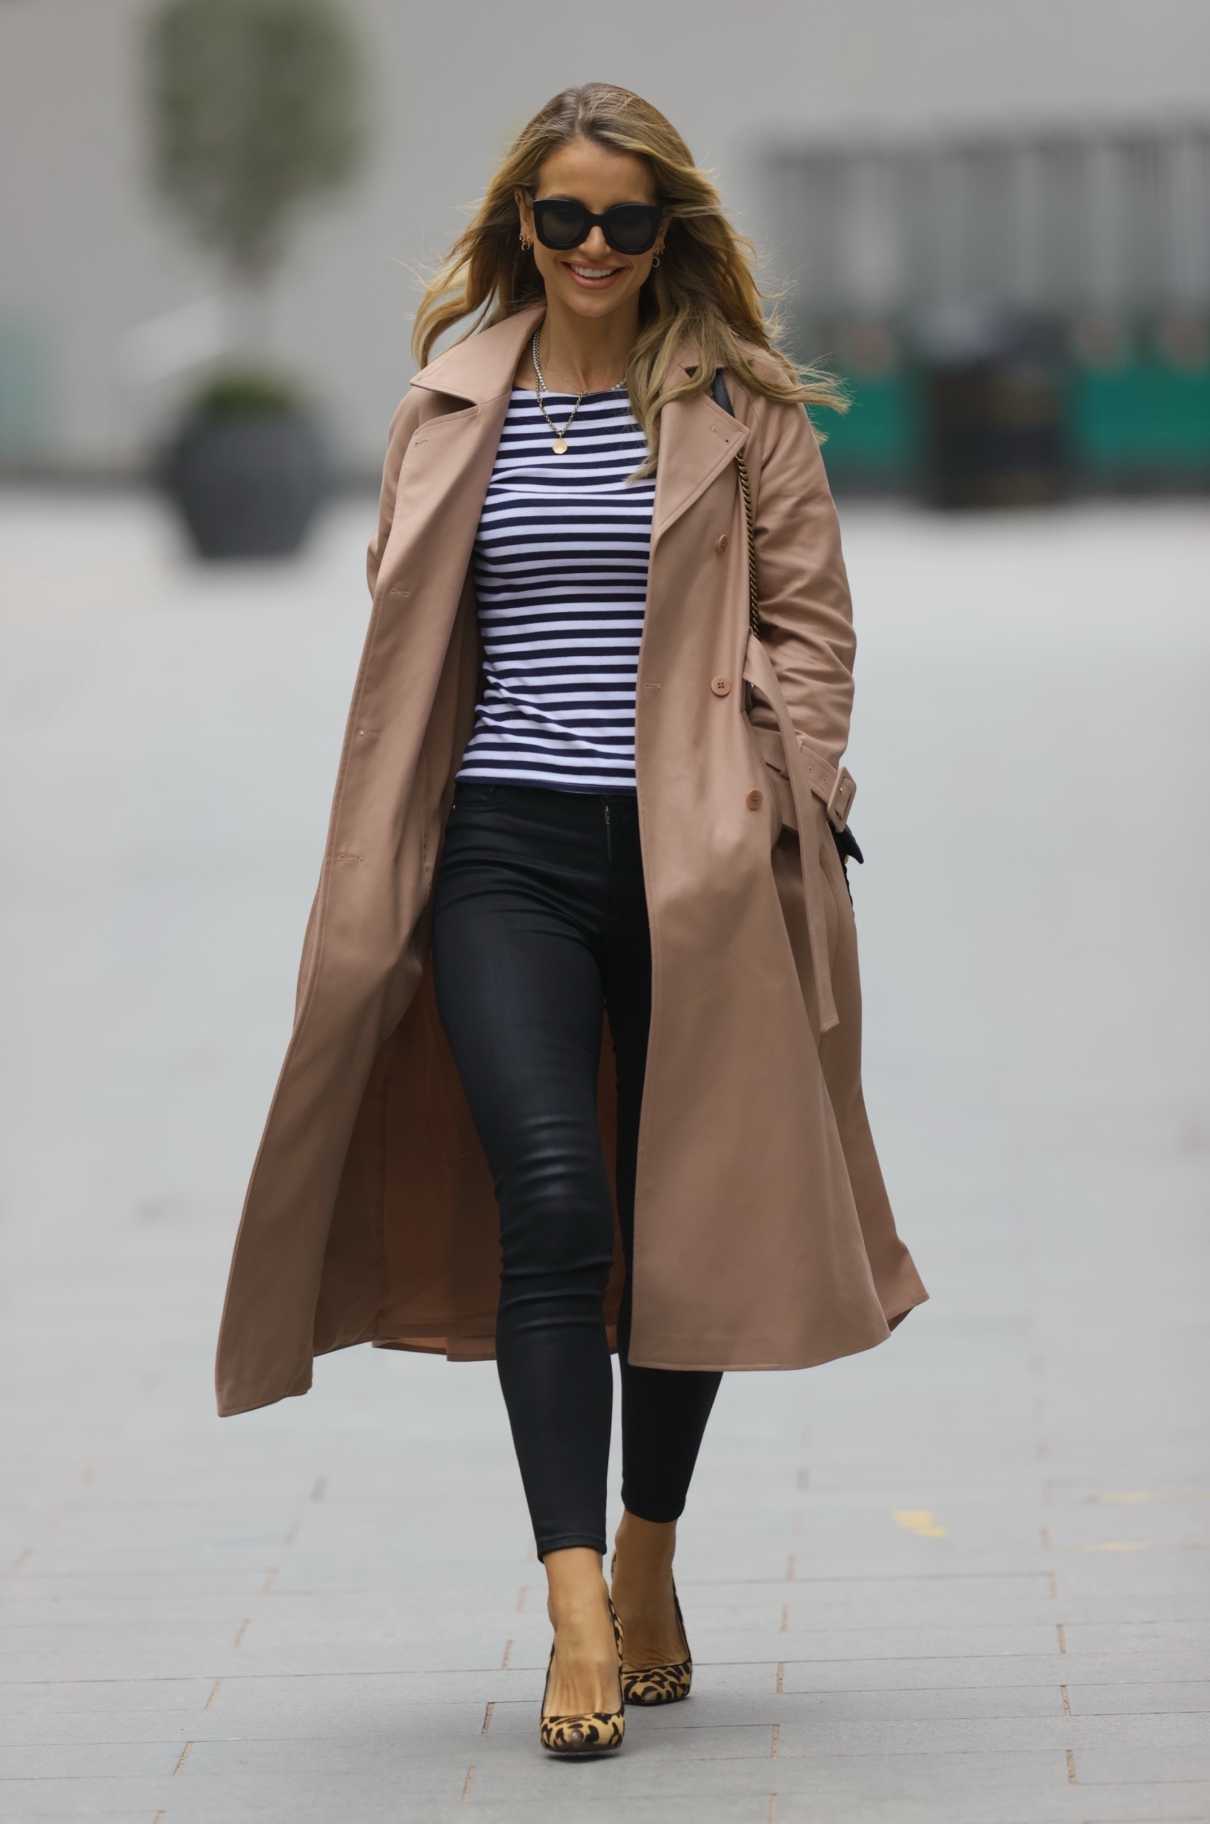 Vogue Williams in a Beige Trench Coat